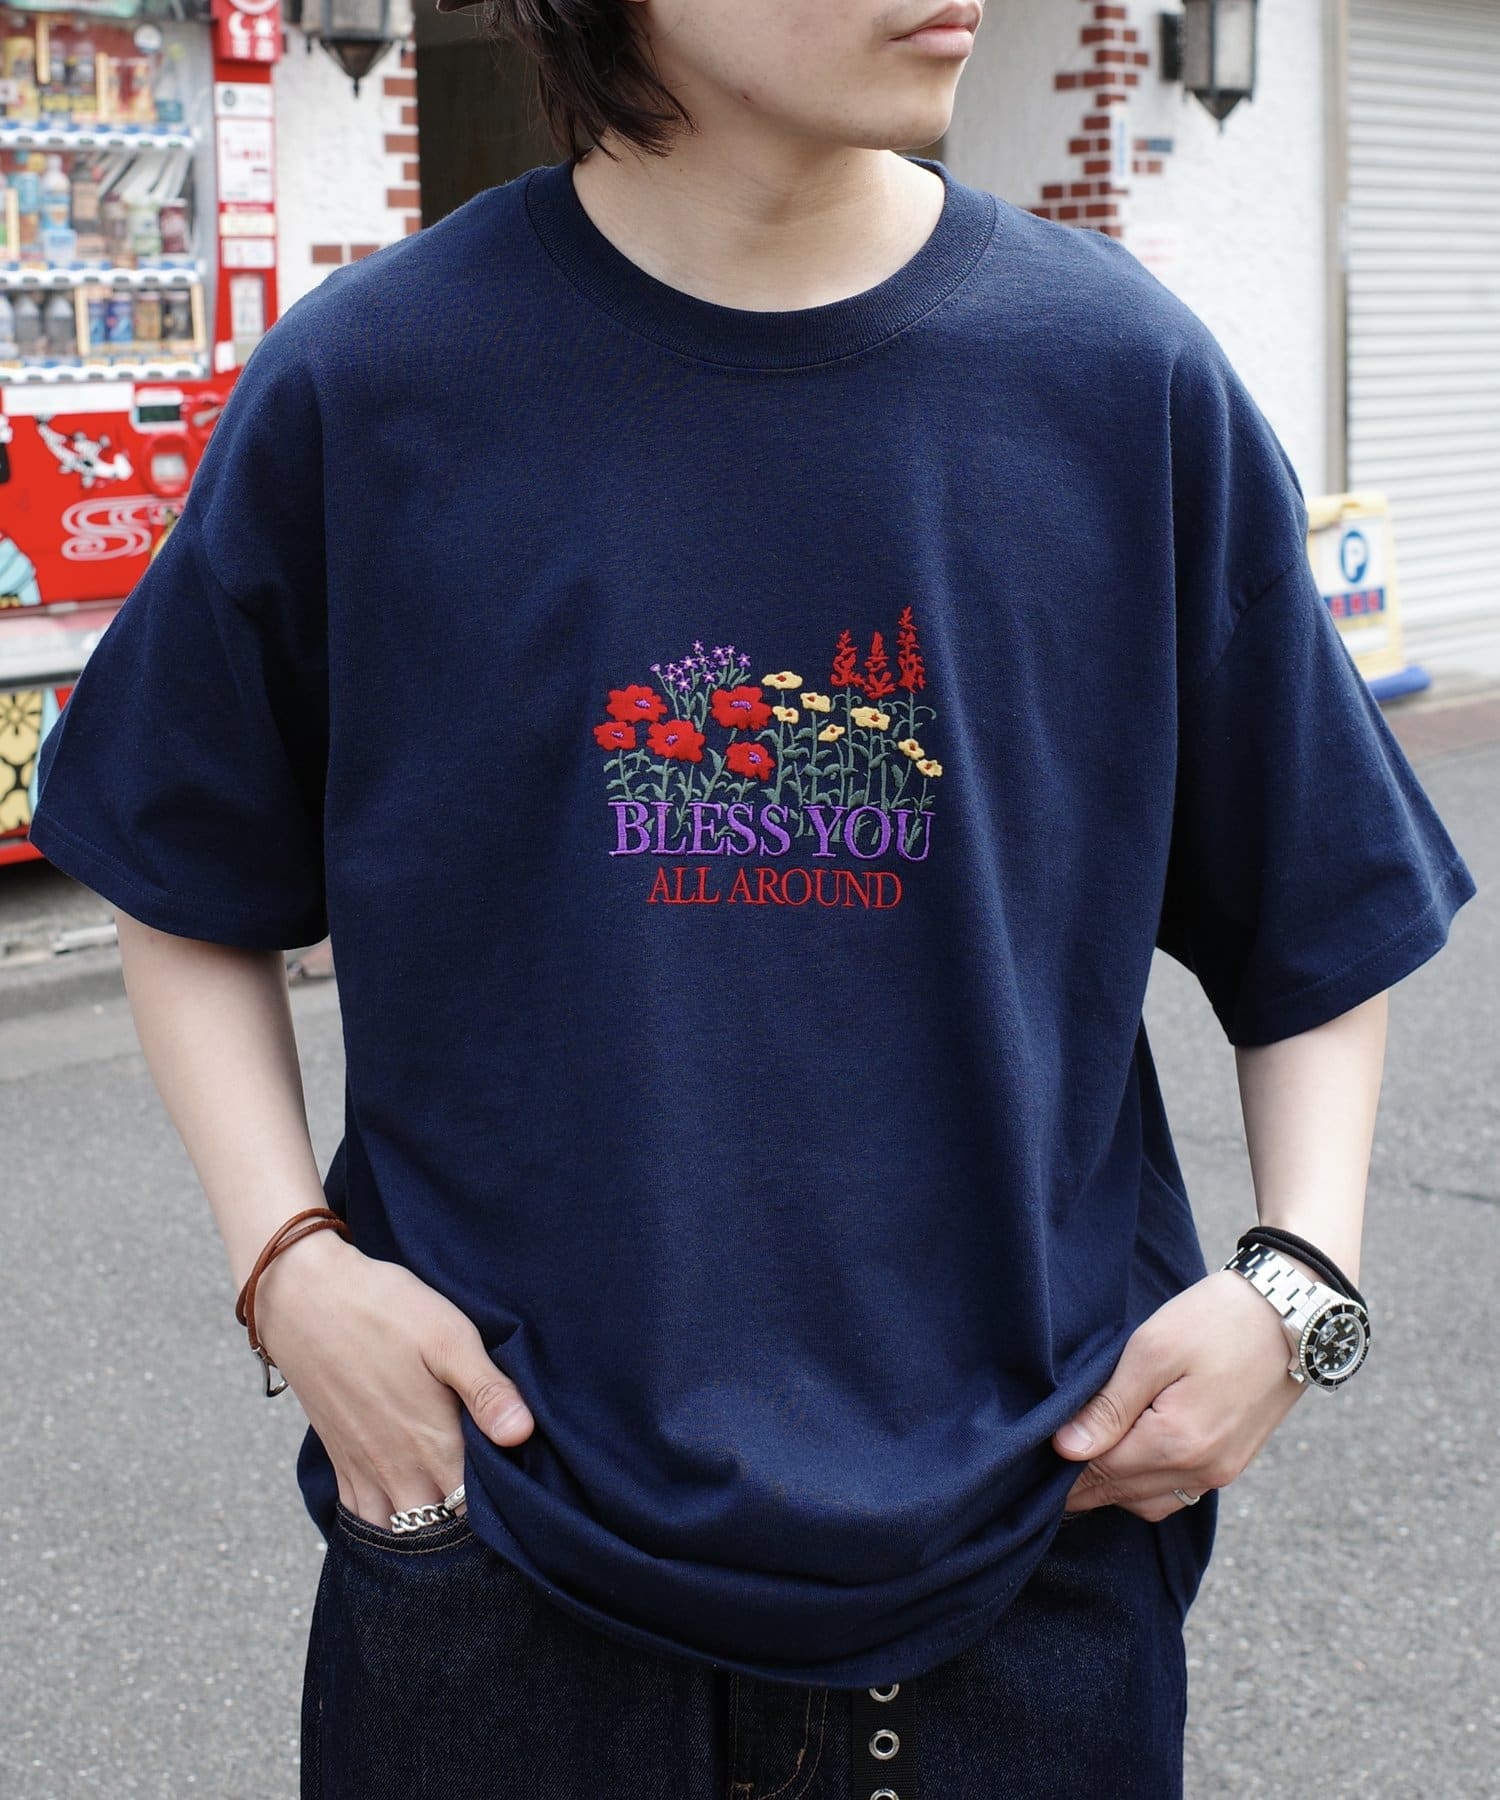 WHO’S WHO gallery(フーズフーギャラリー) 【BLESS YOU/ブレスユー】フラワーバンチTEE